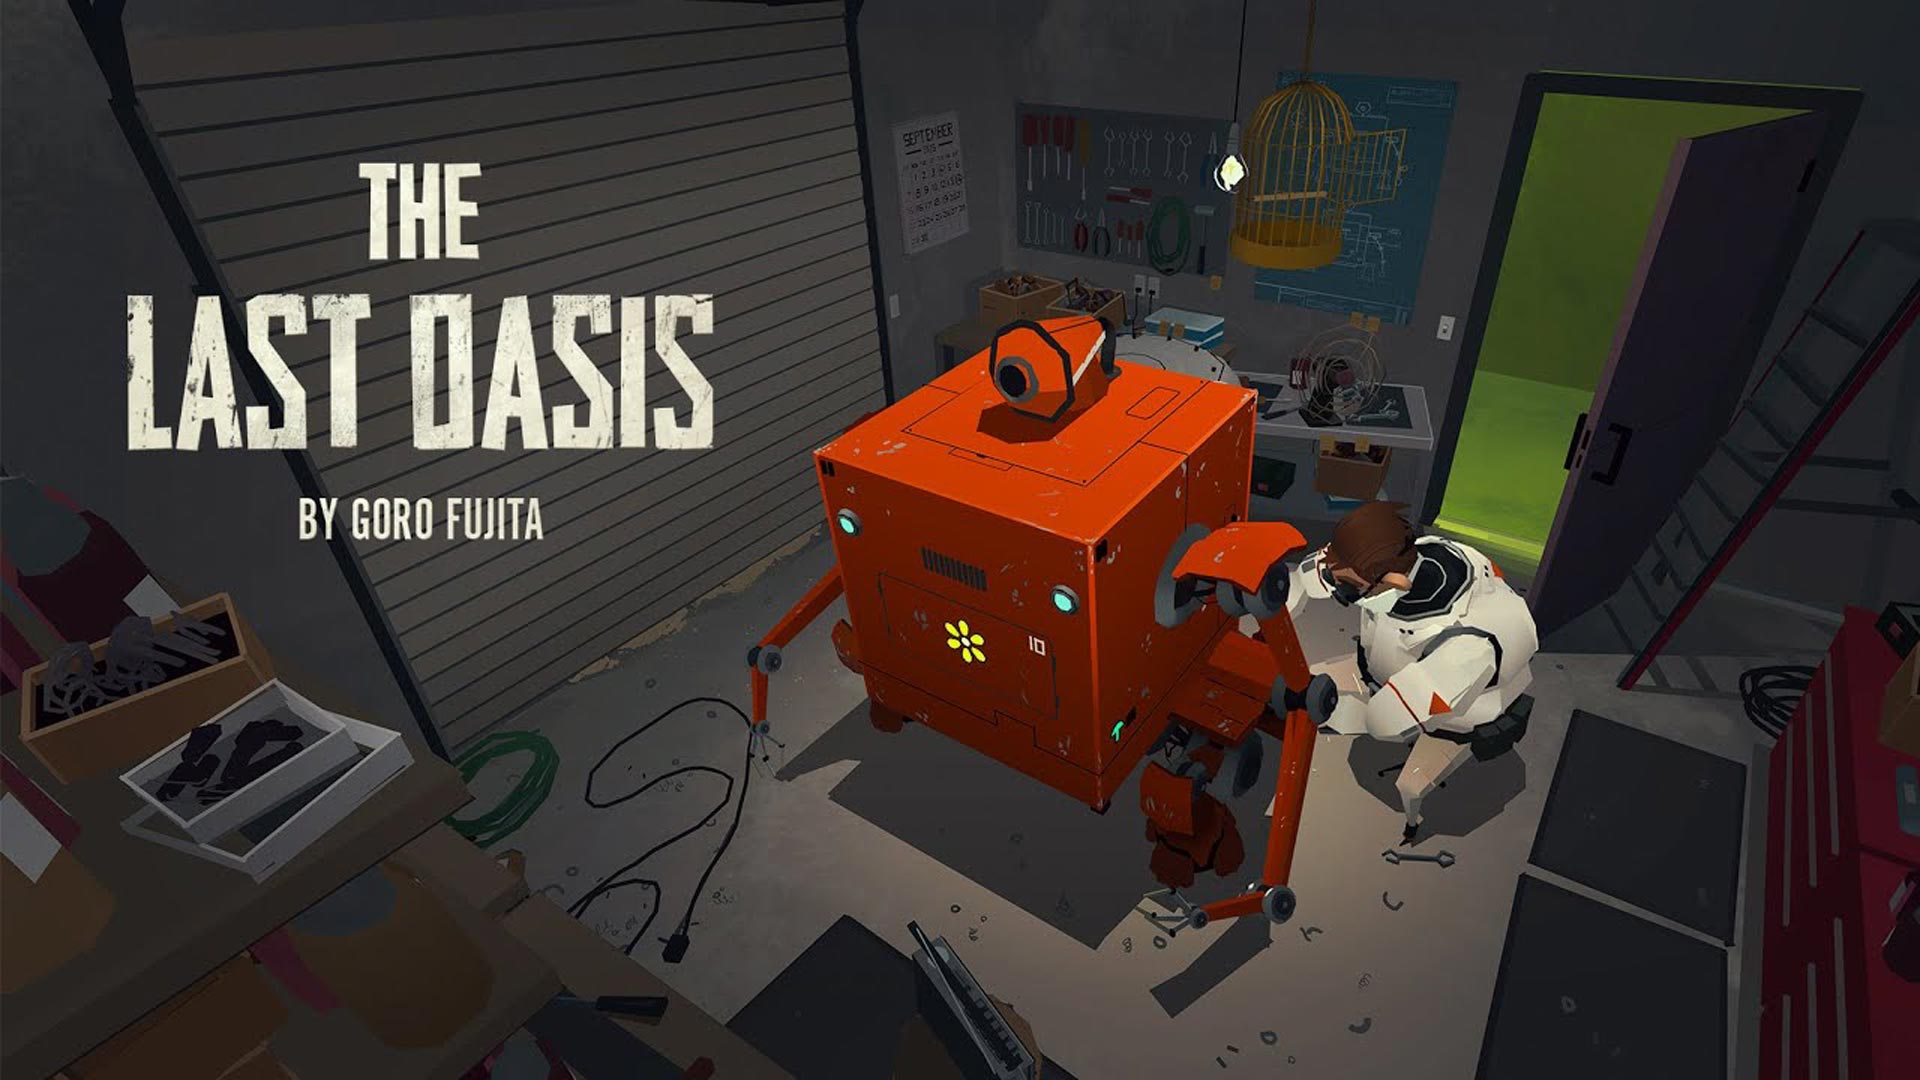 Playa uvas reembolso Facebook Artist Unveils Impressive Oculus Quest Experience 'The Last  Oasis', Built in 'Quill' – Road to VR